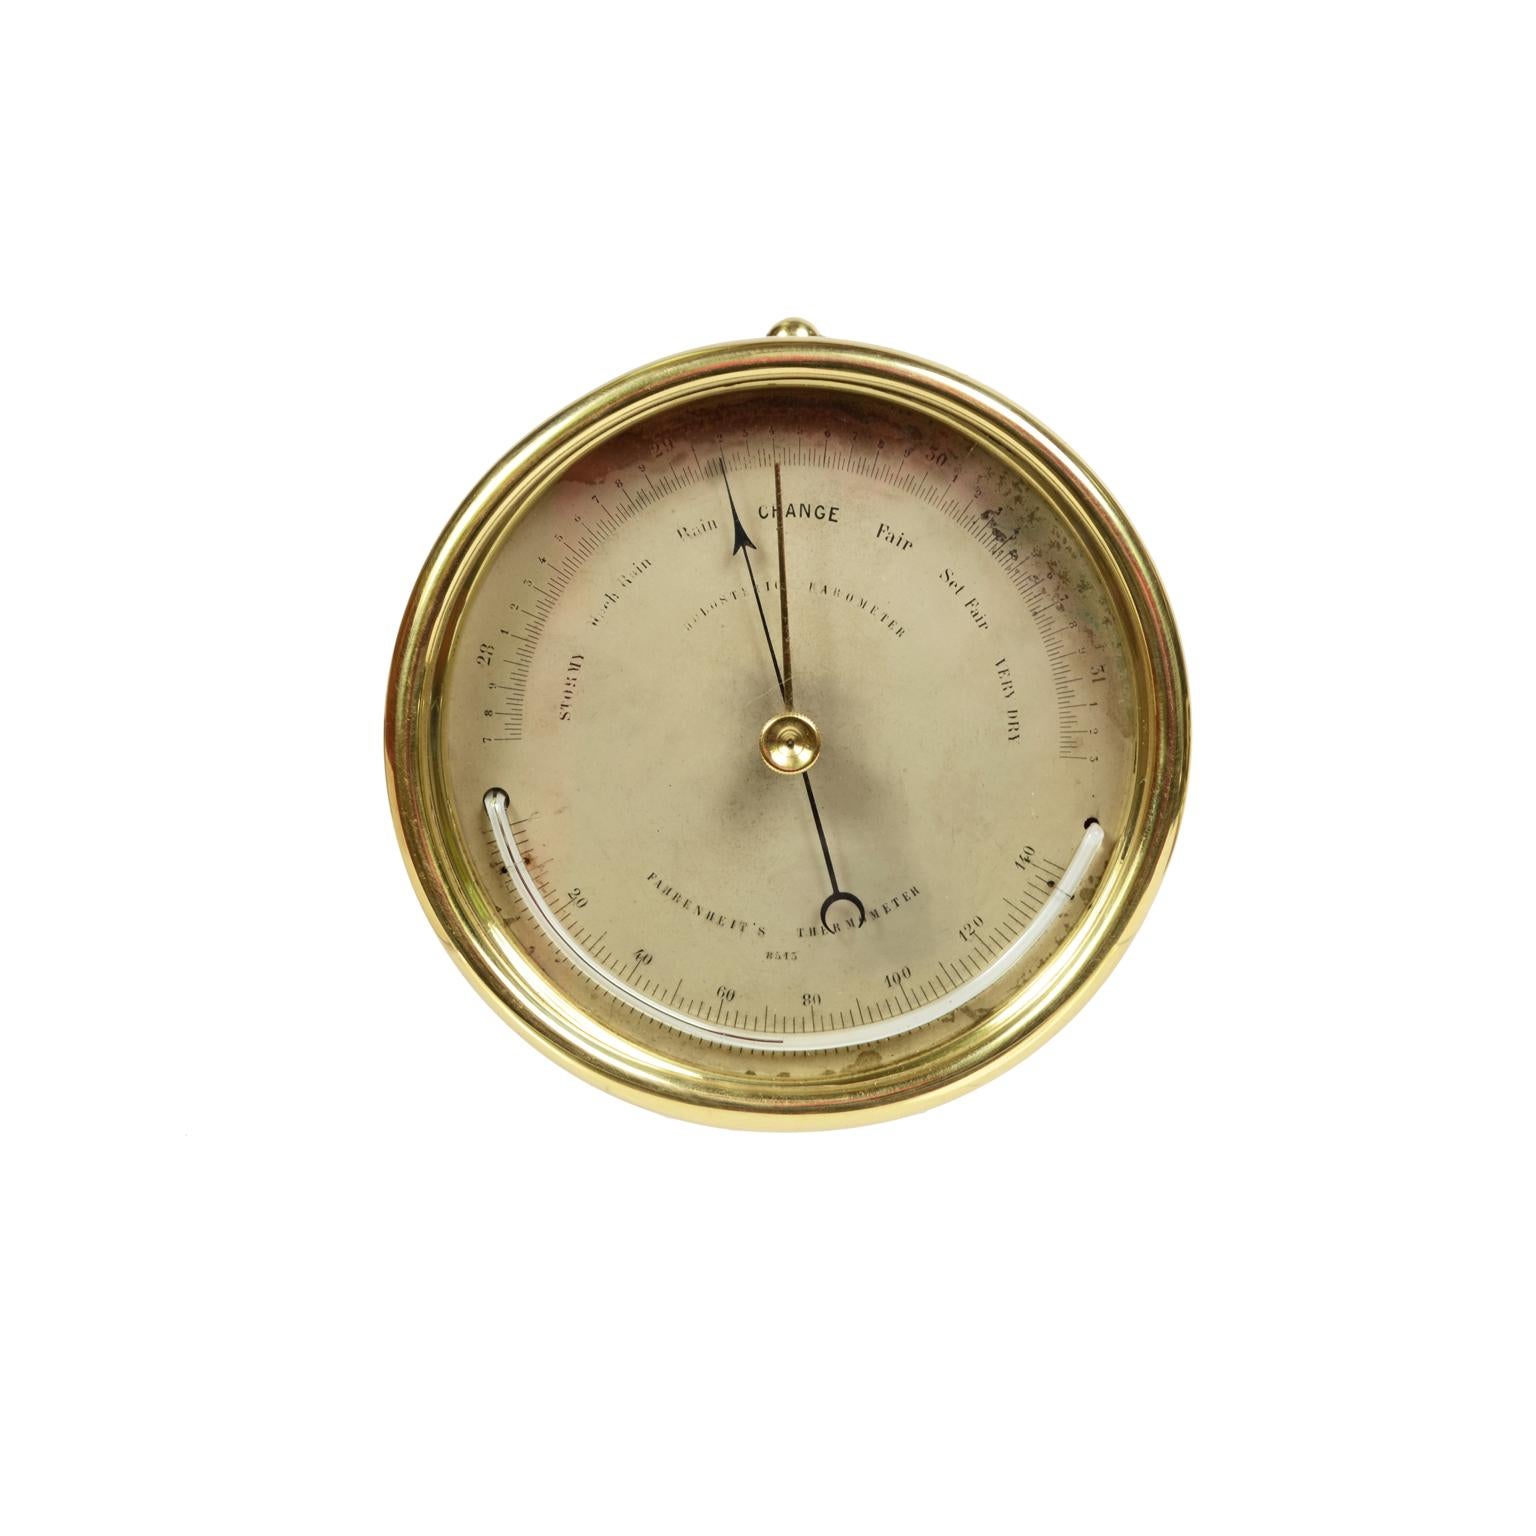 British Holosteric Barometer Made of Brass and Glass, Late 19th Century